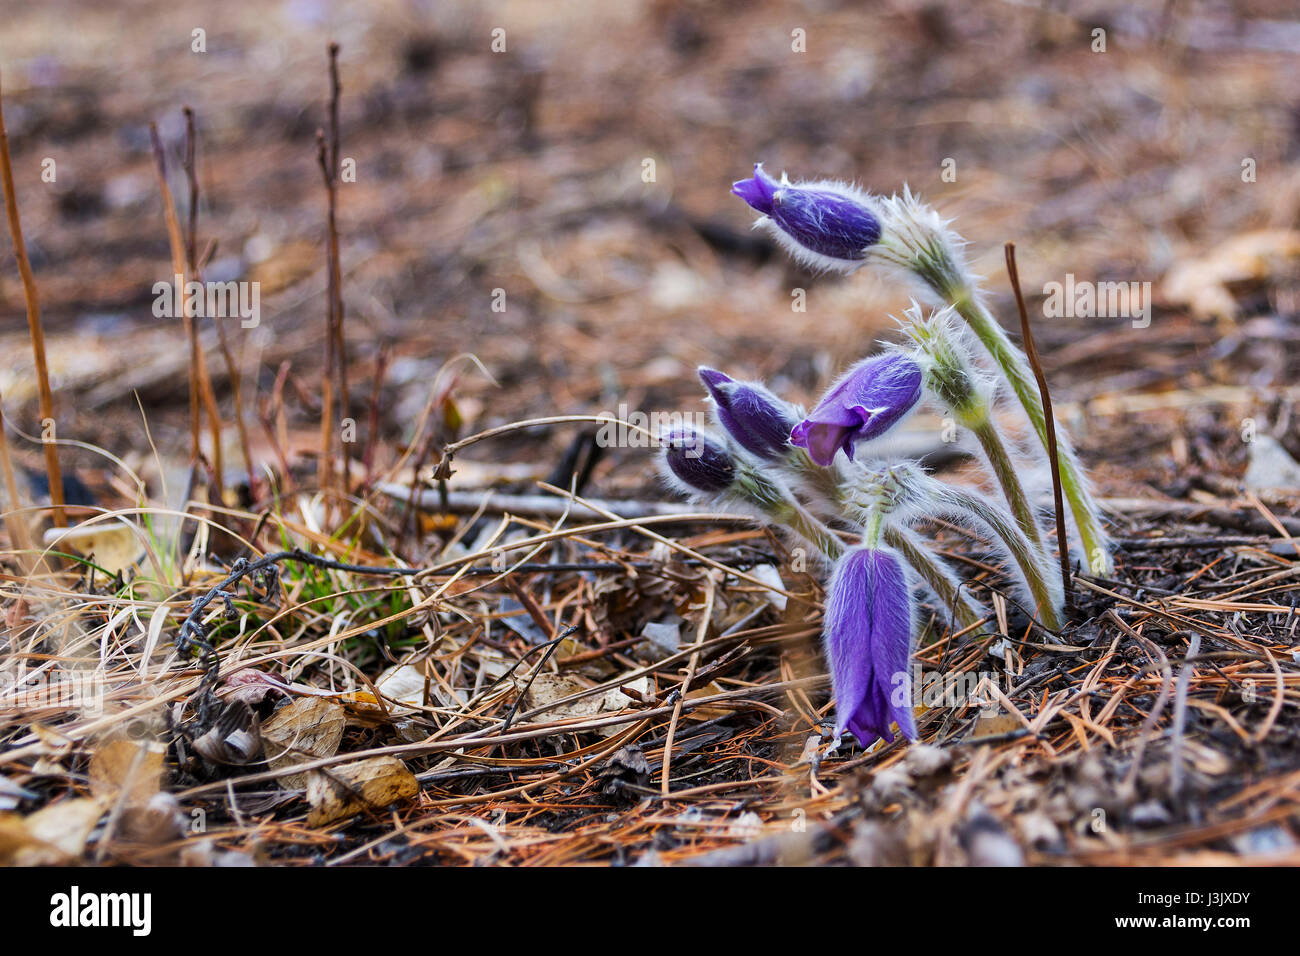 Pasque flower is also called the May Day flower. It grows wild and its blooming is one of the first signs of spring. Stock Photo